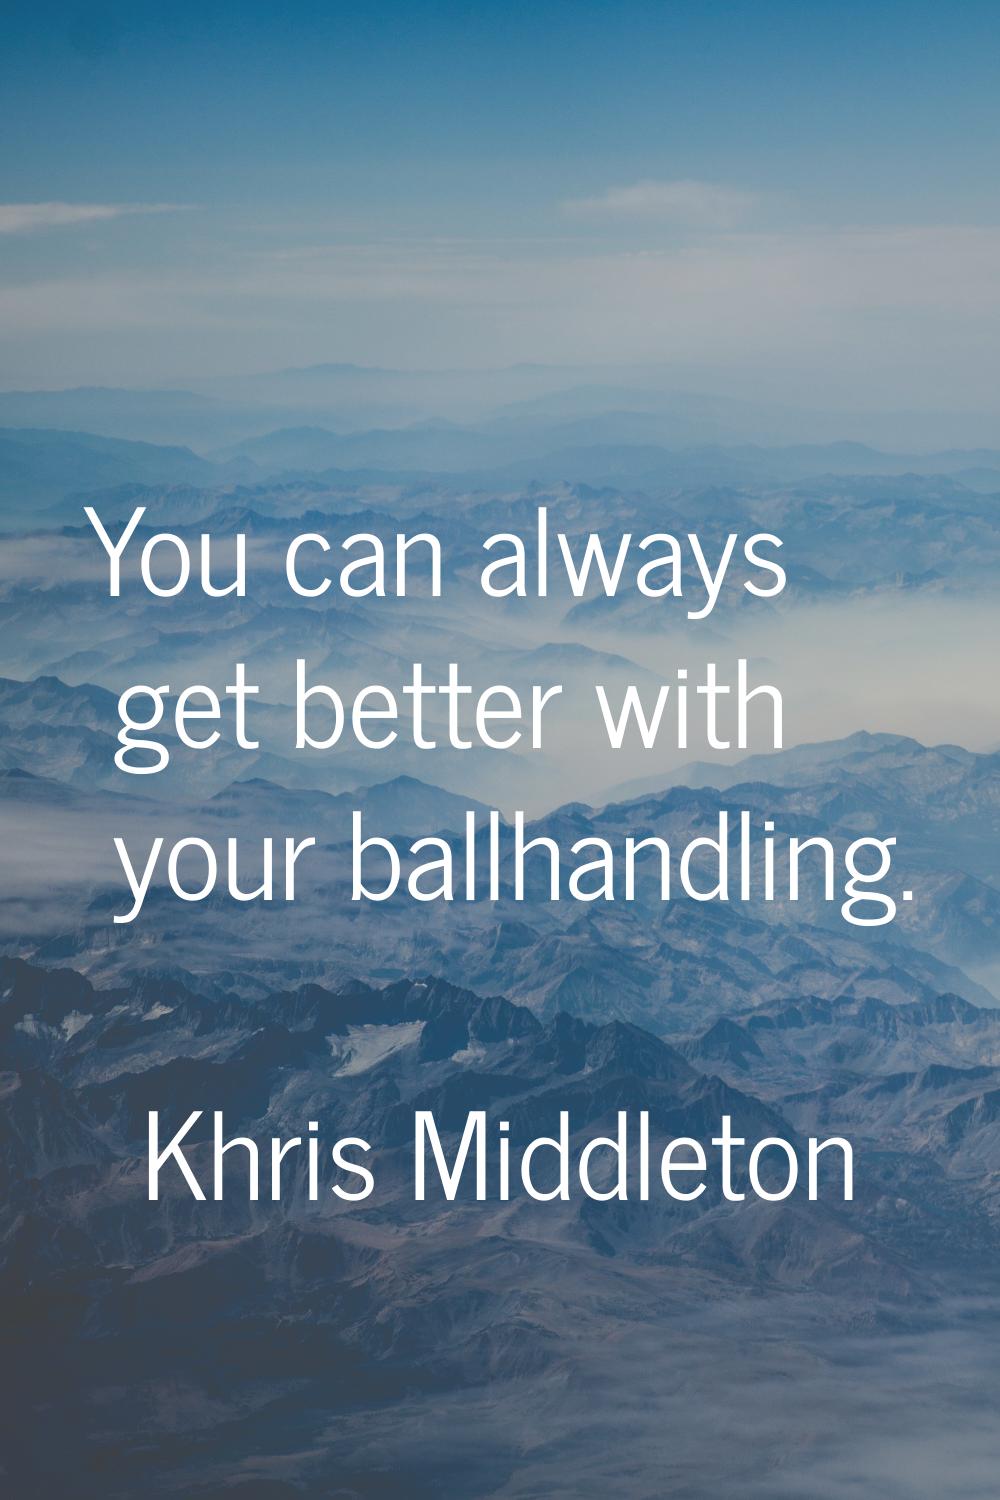 You can always get better with your ballhandling.